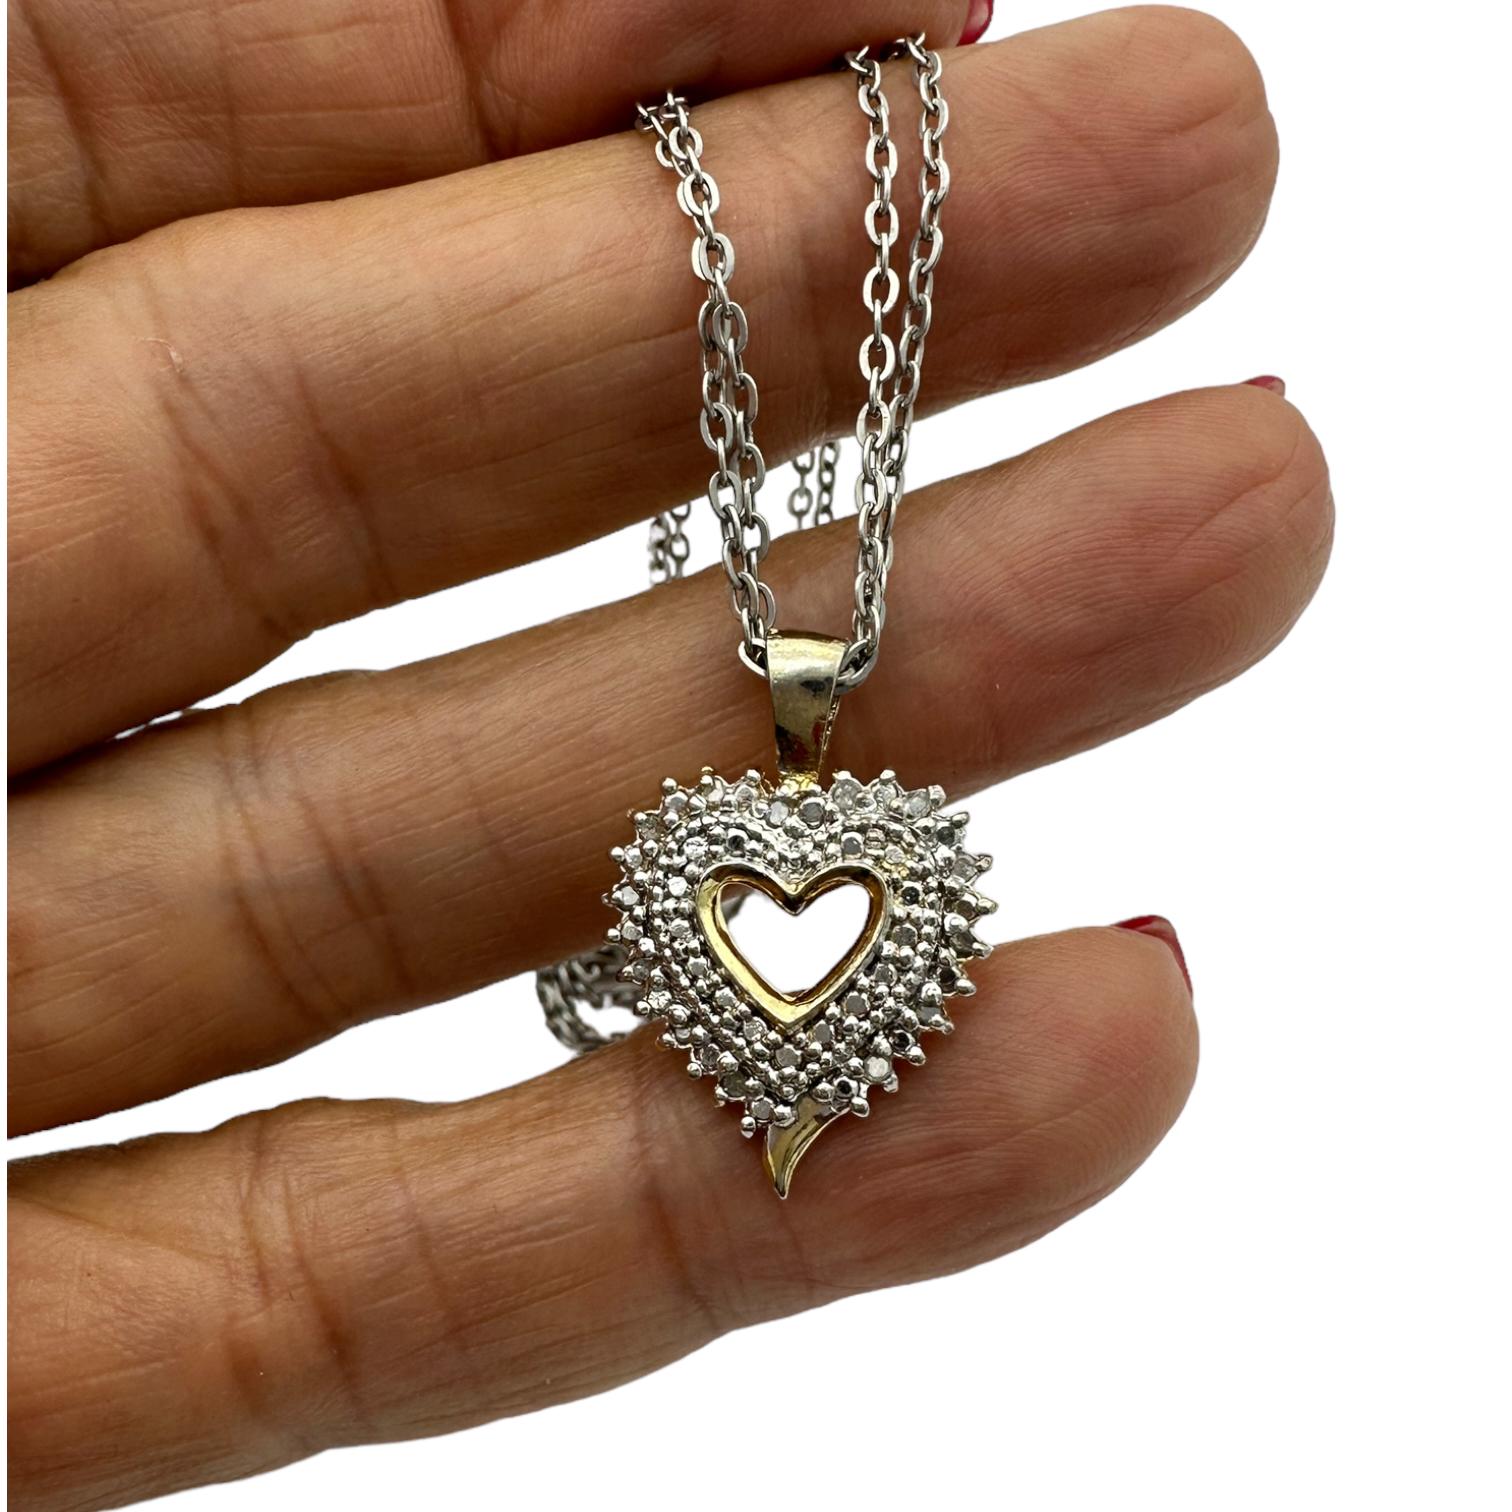 This stunning pendant radiates elegance with its double heart halo design. It features .05 carats of diamonds, set in a 925 sterling silver chain—an ideal piece for jewelry wearers who want to show off their romantic side.
Open diamond heart pendant